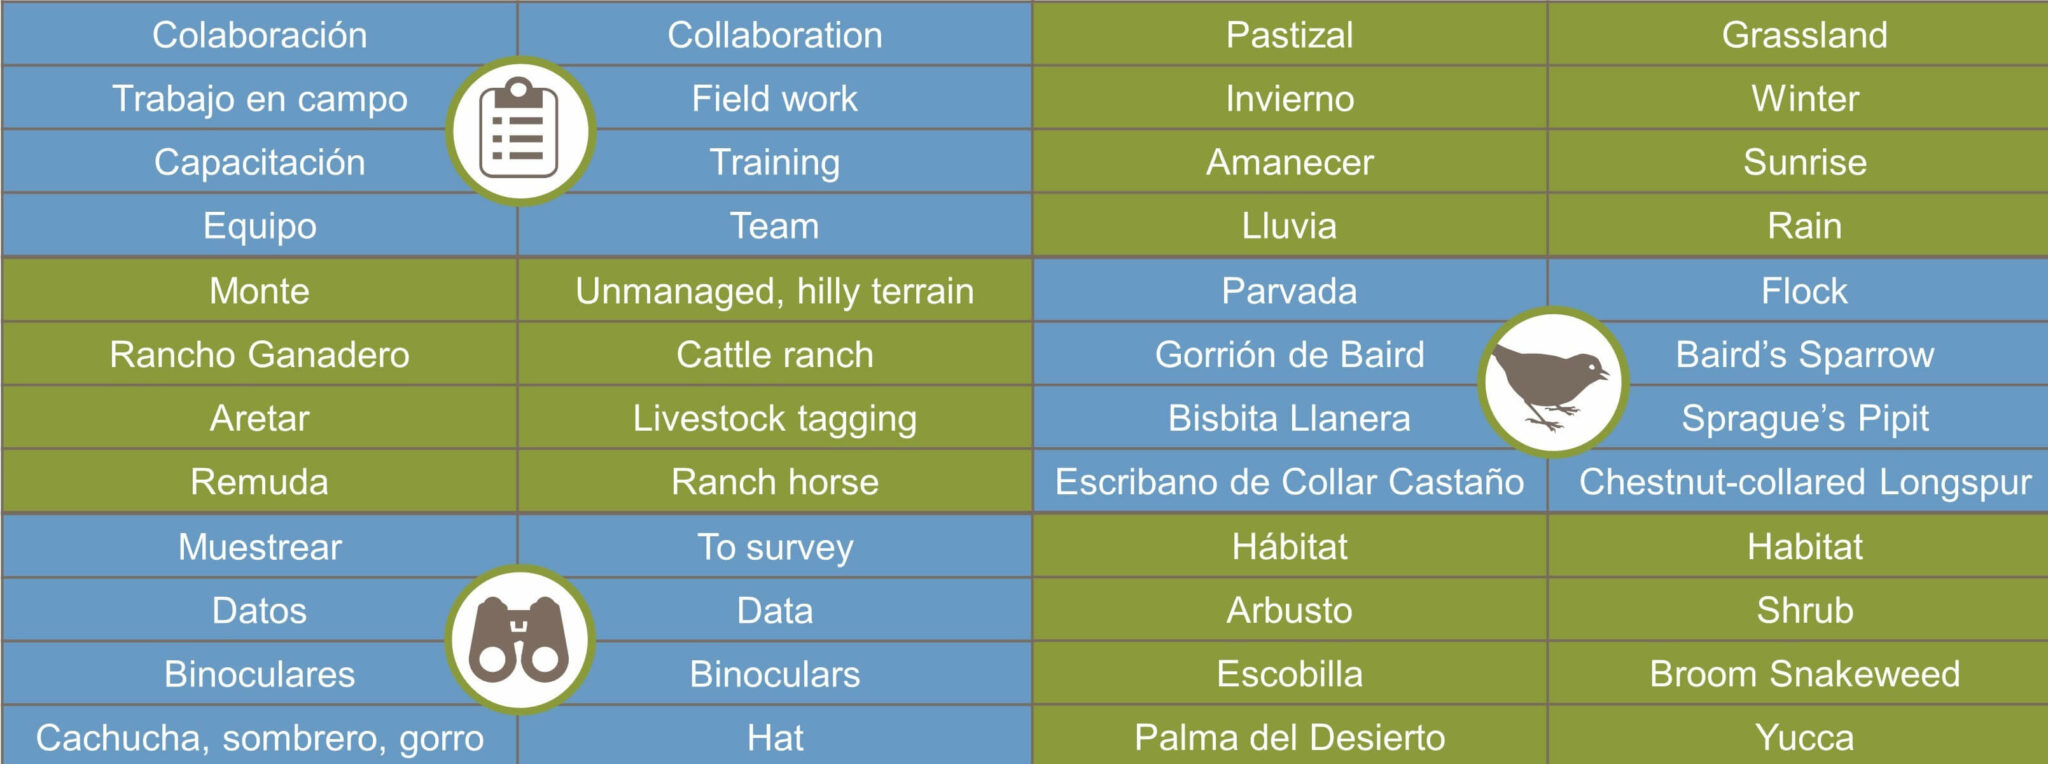 Grid list of words used in field workk, translated between Spanish and English